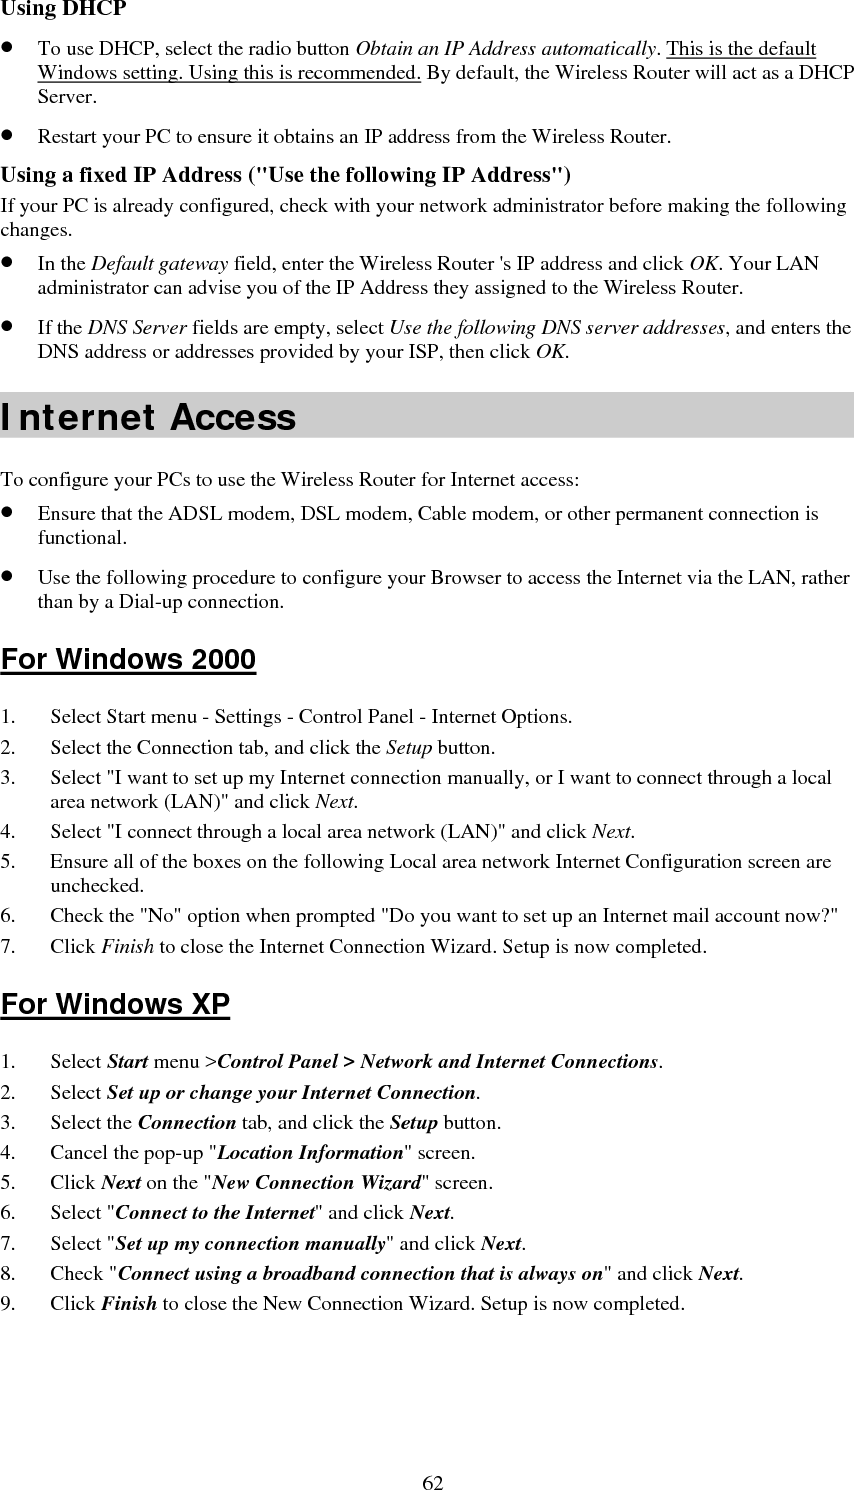   63Accessing AOL To access AOL (America On Line) through the Wireless Router, the AOL for Windows software must be configured to use TCP/IP network access, rather than a dial-up connection. The configuration process is as follows: 1. Start the AOL for Windows communication software. Ensure that it is Version 2.5, 3.0 or later. This procedure will not work with earlier versions. 2. Click the Setup button. 3. Select Create Location, and change the location name from &quot;New Locality&quot; to &quot; Wireless Router &quot;. 4. Click Edit Location. Select TCP/IP for the Network field. (Leave the Phone Number blank.)  5. Click Save, then OK.  6. Configuration is now complete.  7. Before clicking &quot;Sign On&quot;, always ensure that you are using the &quot; Wireless Router &quot; location. Macintosh Clients From your Macintosh, you can access the Internet via the Wireless Router. The procedure is as follows. 1. Open the TCP/IP Control Panel.  2. Select Ethernet from the Connect via pop-up menu. 3. Select Using DHCP Server from the Configure pop-up menu. The DHCP Client ID field can be left blank. 4. Close the TCP/IP panel, saving your settings. Note: If using manually assigned IP addresses instead of DHCP, the required changes are: • Set the Router Address field to the Wireless Router &apos;s IP Address. • Ensure your DNS settings are correct. Linux Clients To access the Internet via the Wireless Router, it is only necessary to set the Wireless Router as the &quot;Gateway&quot;. Ensure you are logged in as &quot;root&quot; before attempting any changes. Fixed IP Address By default, most Unix installations use a fixed IP Address. If you wish to continue using a fixed IP Address, make the following changes to your configuration. • Set your &quot;Default Gateway&quot; to the IP Address of the Wireless Router. • Ensure your DNS (Domain Name server) settings are correct. To act as a DHCP Client (Recommended) The procedure below may vary according to your version of Linux and X -windows shell. 1. Start your X Windows client. 2. Select Control Panel – Network. 3. Select the &quot;Interface&quot; entry for your Network card. Normally, this will be called &quot;eth0&quot;. 4. Click the Edit button, set the &quot;protocol&quot; to &quot;DHCP&quot;, and save this data.  5. To apply your changes:  • Use the &quot;Deactivate&quot; and &quot;Activate&quot; buttons, if available. • OR, restart your system. 